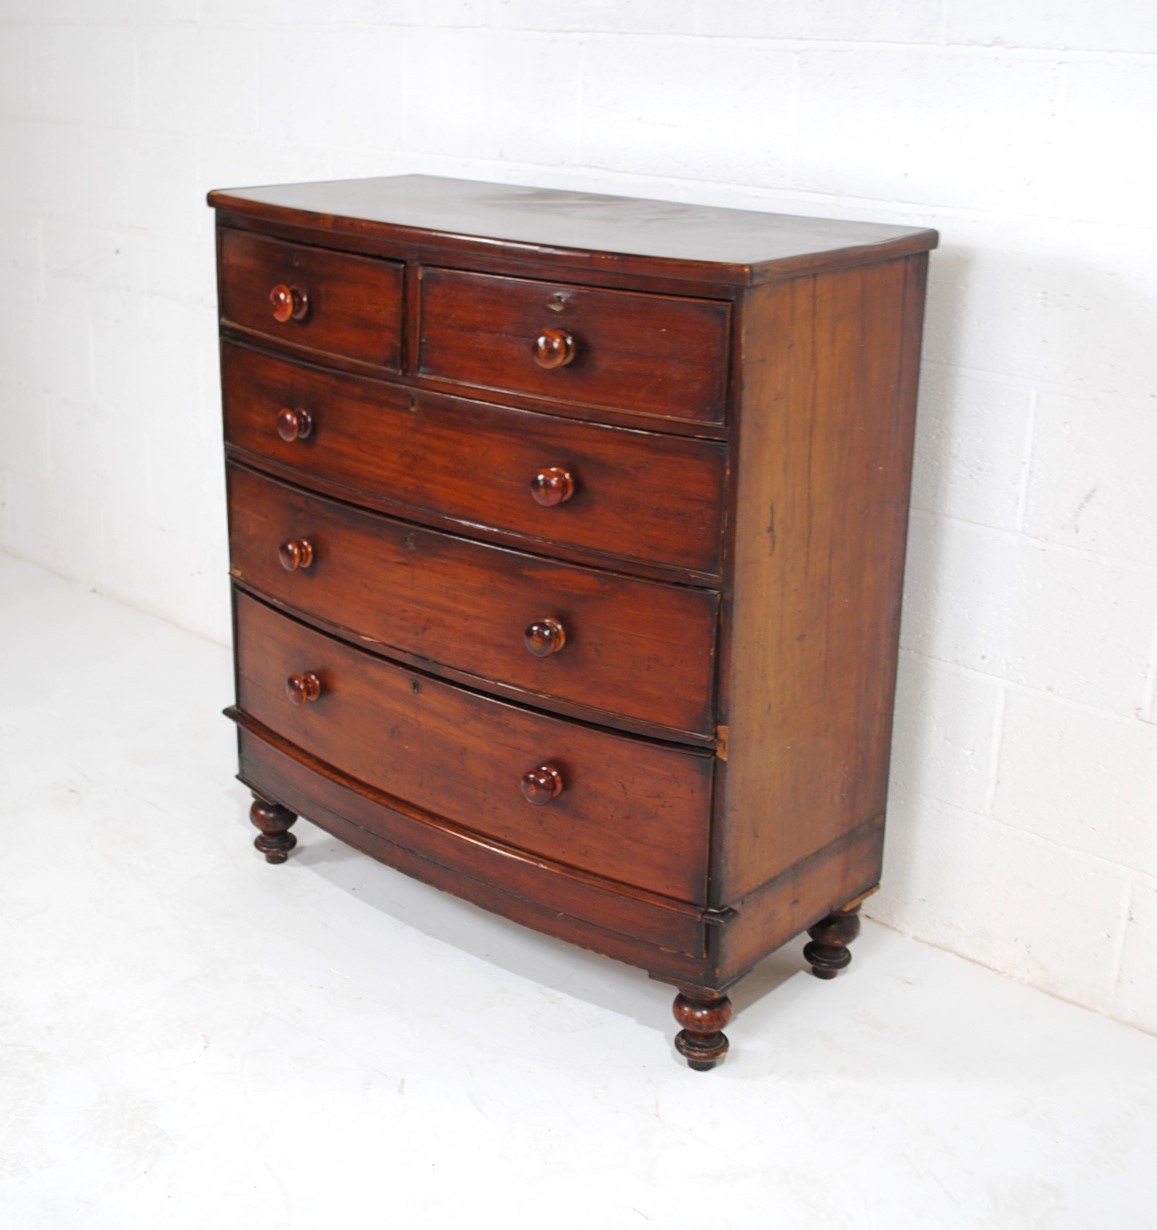 A Victorian mahogany bow-fronted chest of five drawers, raised on turned legs - one leg loose but - Image 2 of 8